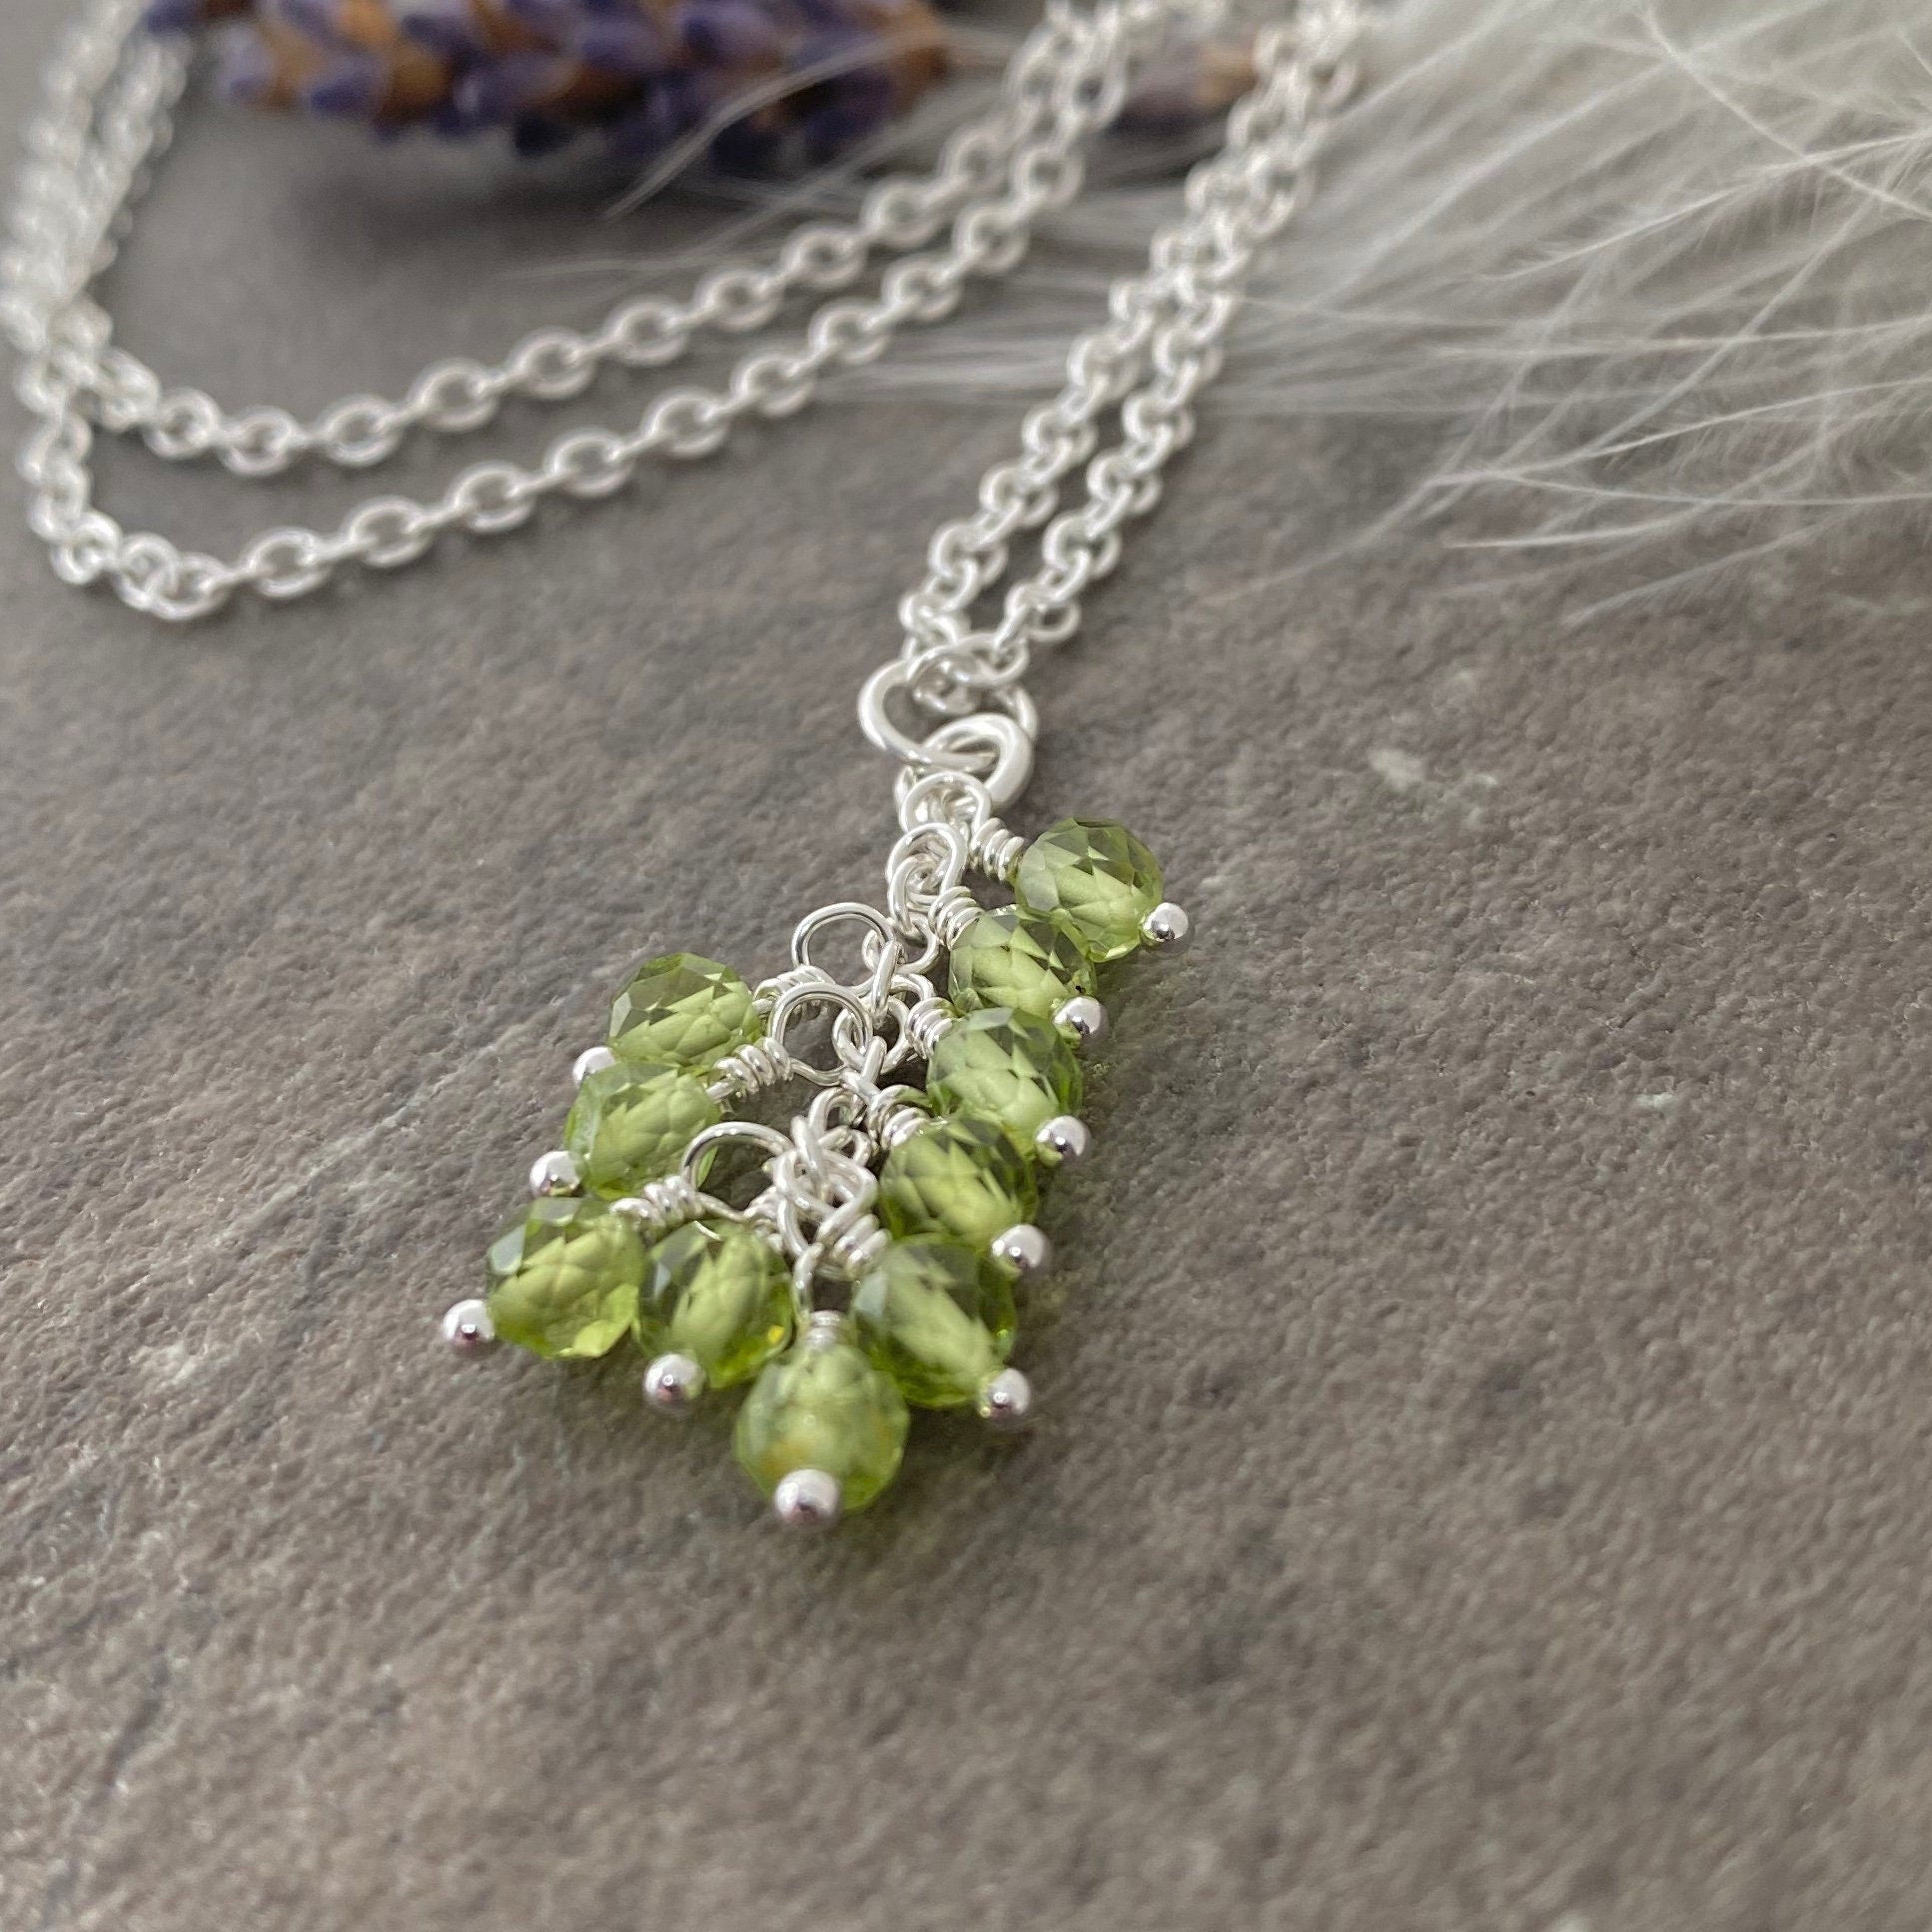 Dainty August birthstone jewellery set, Peridot bracelet and necklace set, sterling silver faceted gemstone necklace